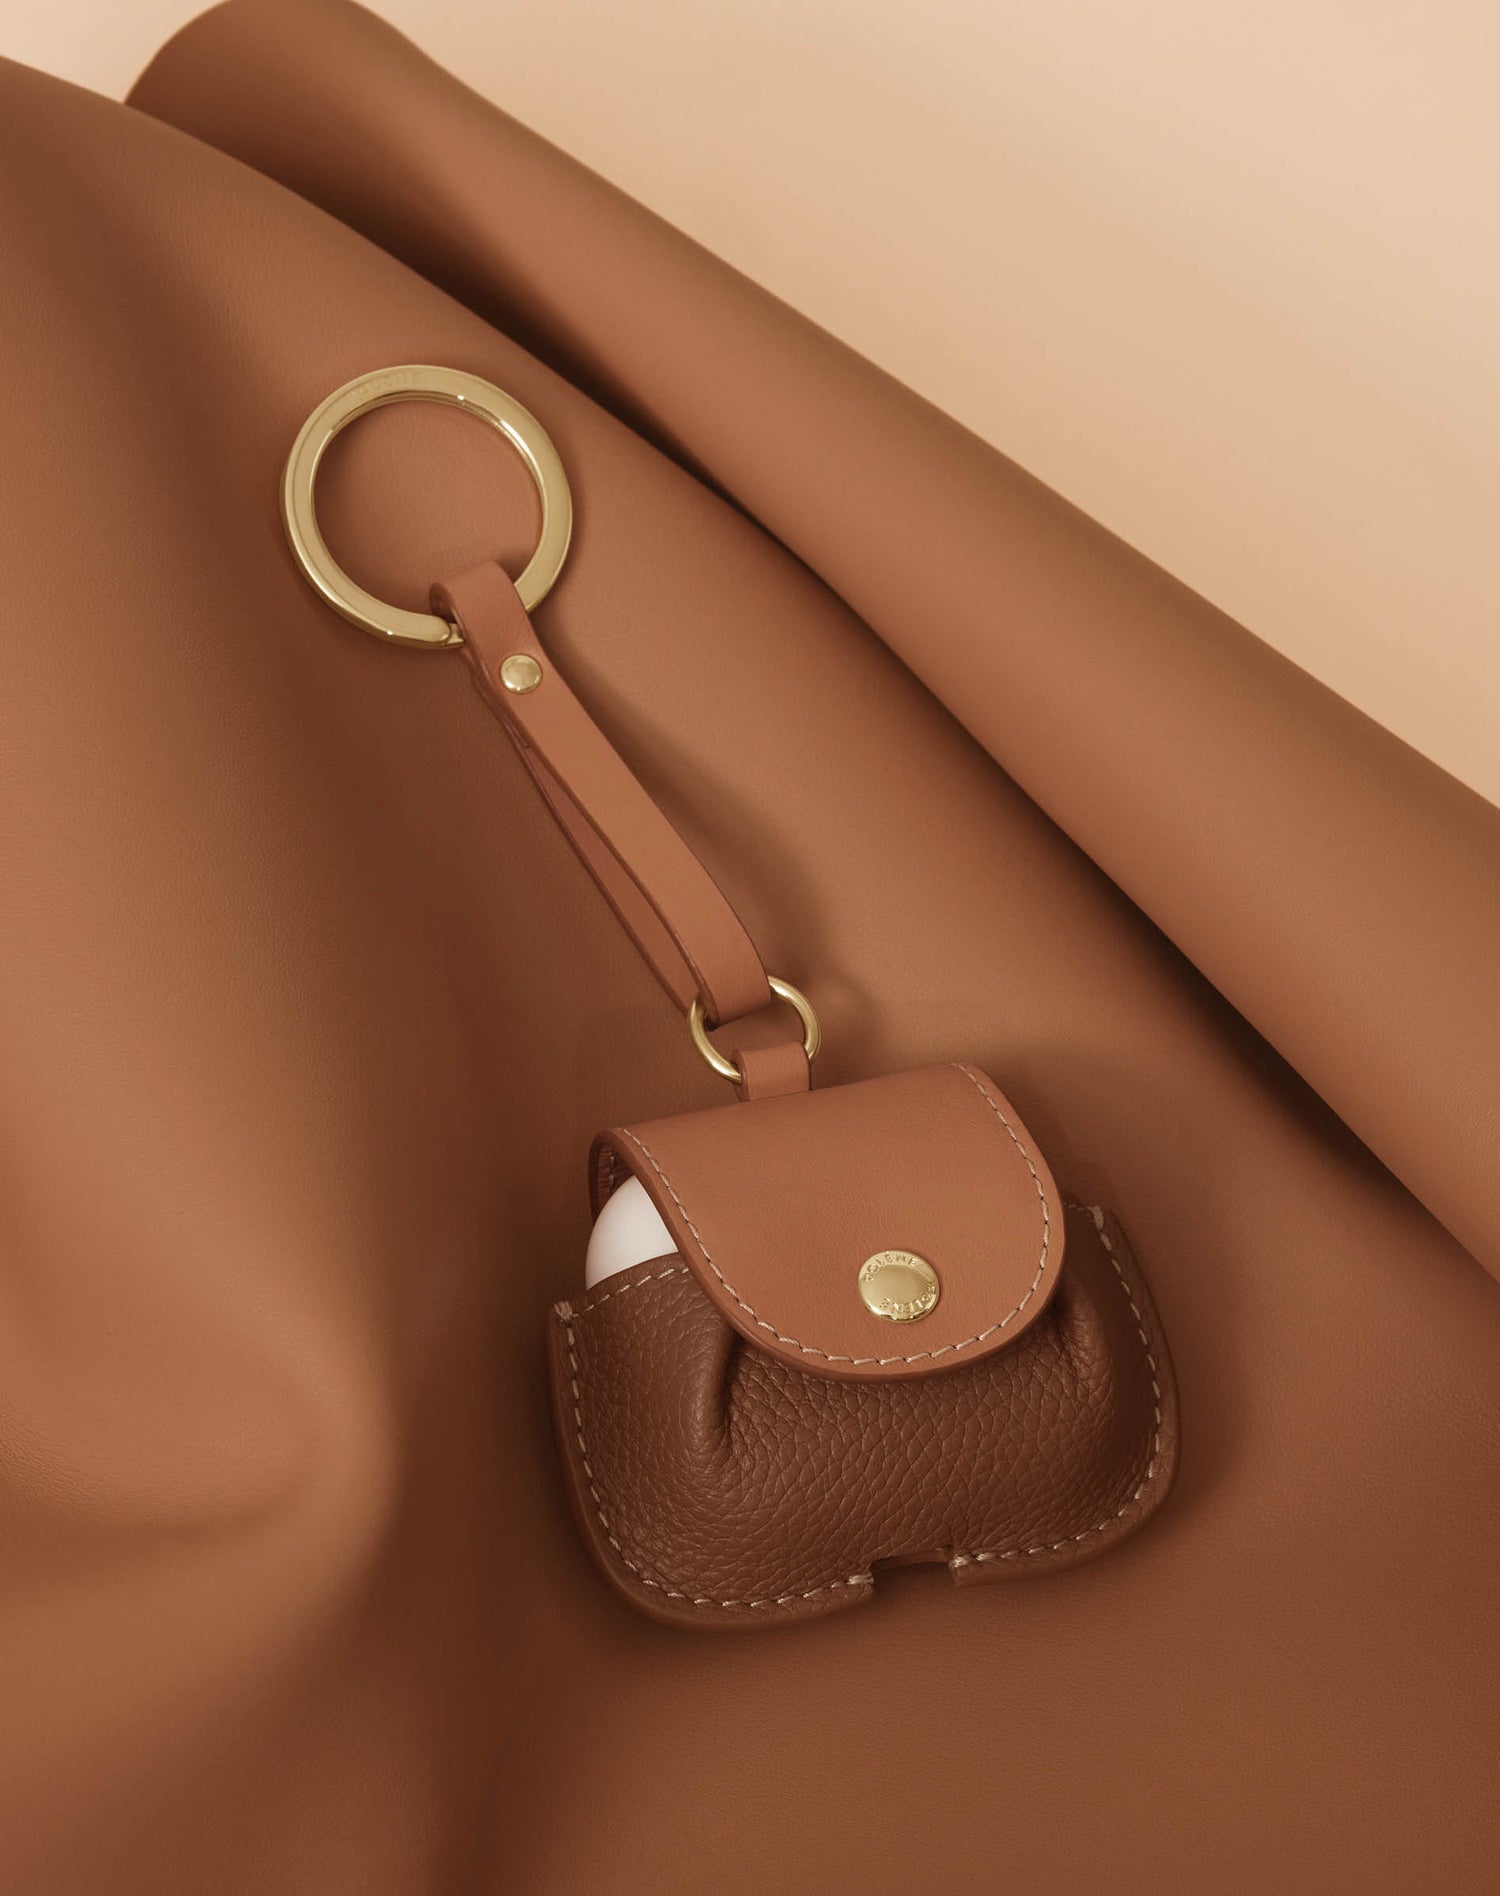 Small leather goods made from leather off-cuts – Polène